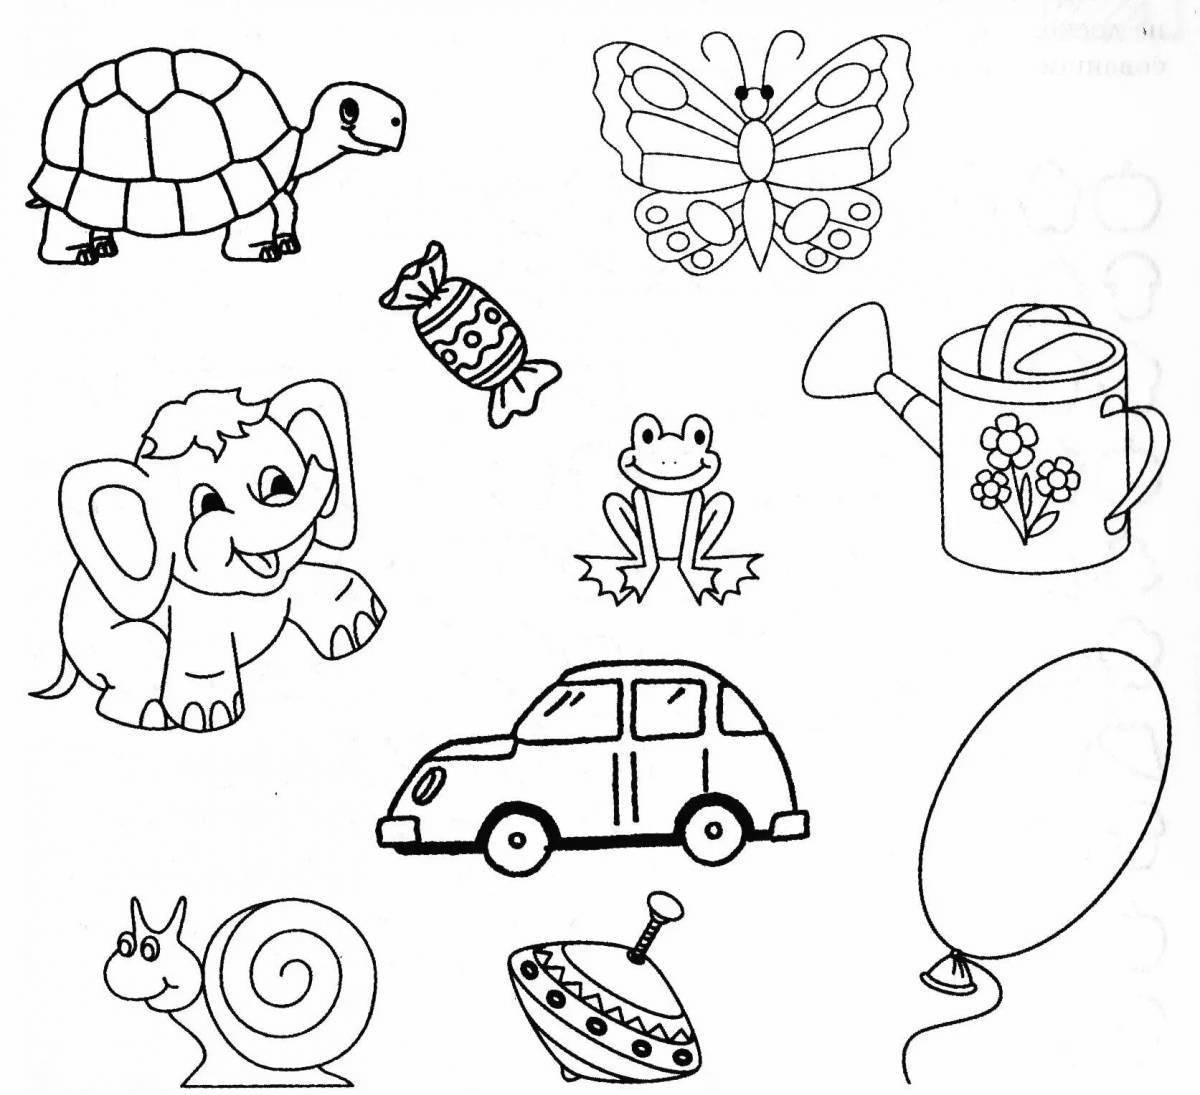 Bright target coloring page